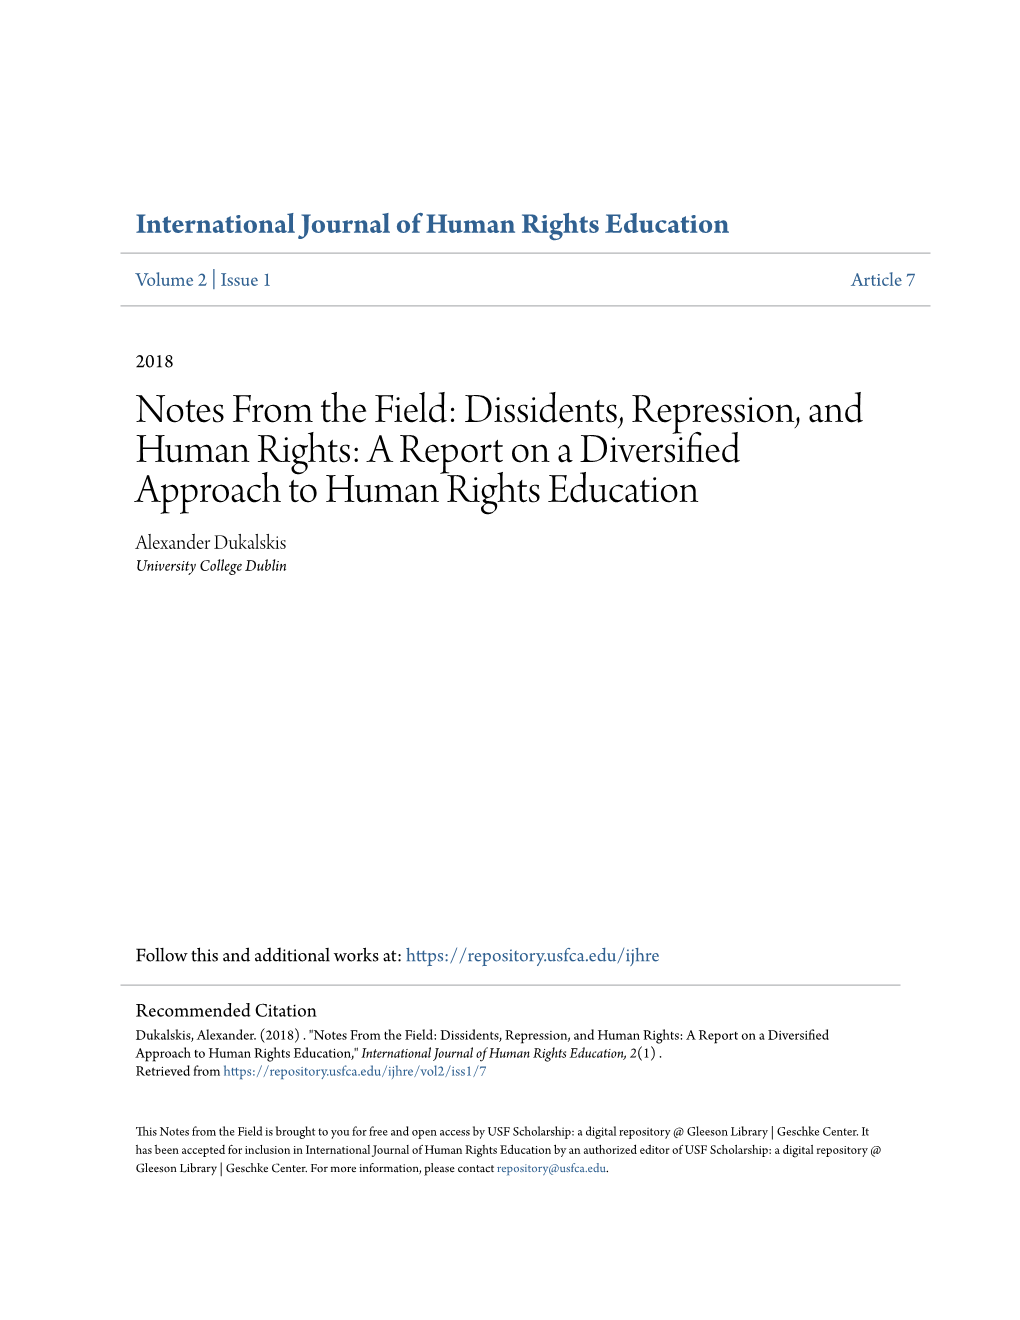 Dissidents, Repression, and Human Rights: a Report on a Diversified Approach to Human Rights Education Alexander Dukalskis University College Dublin